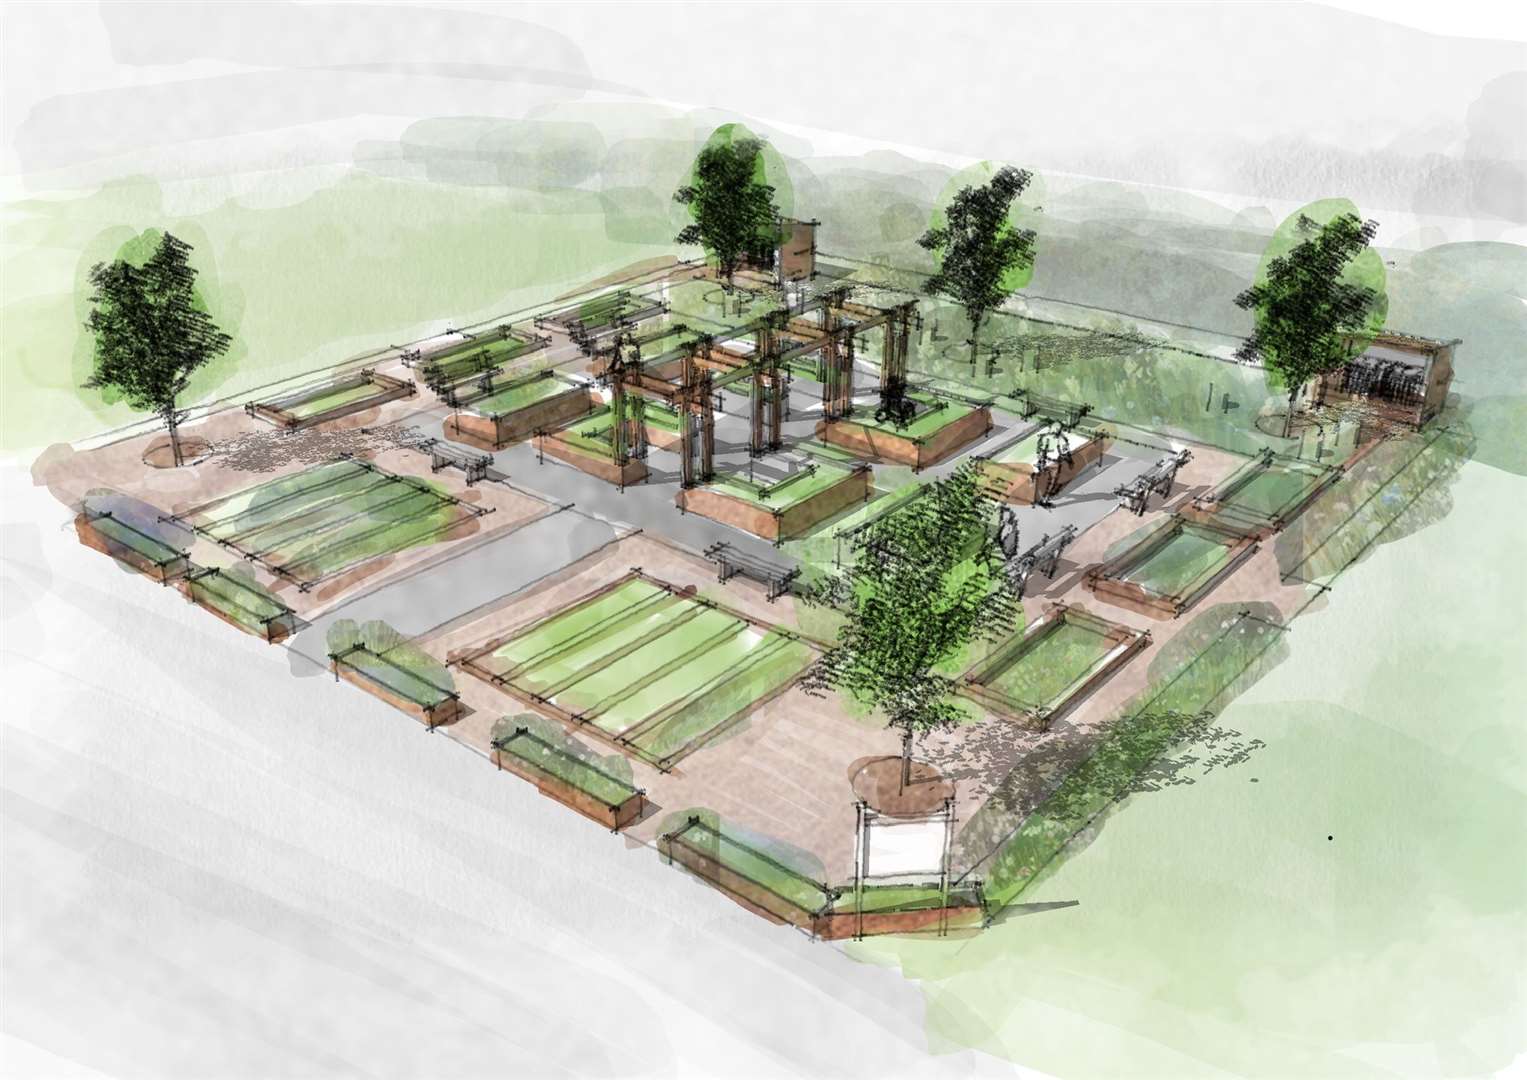 An artist's illustration of the indicative layout of the community garden being created by Holm Grown.